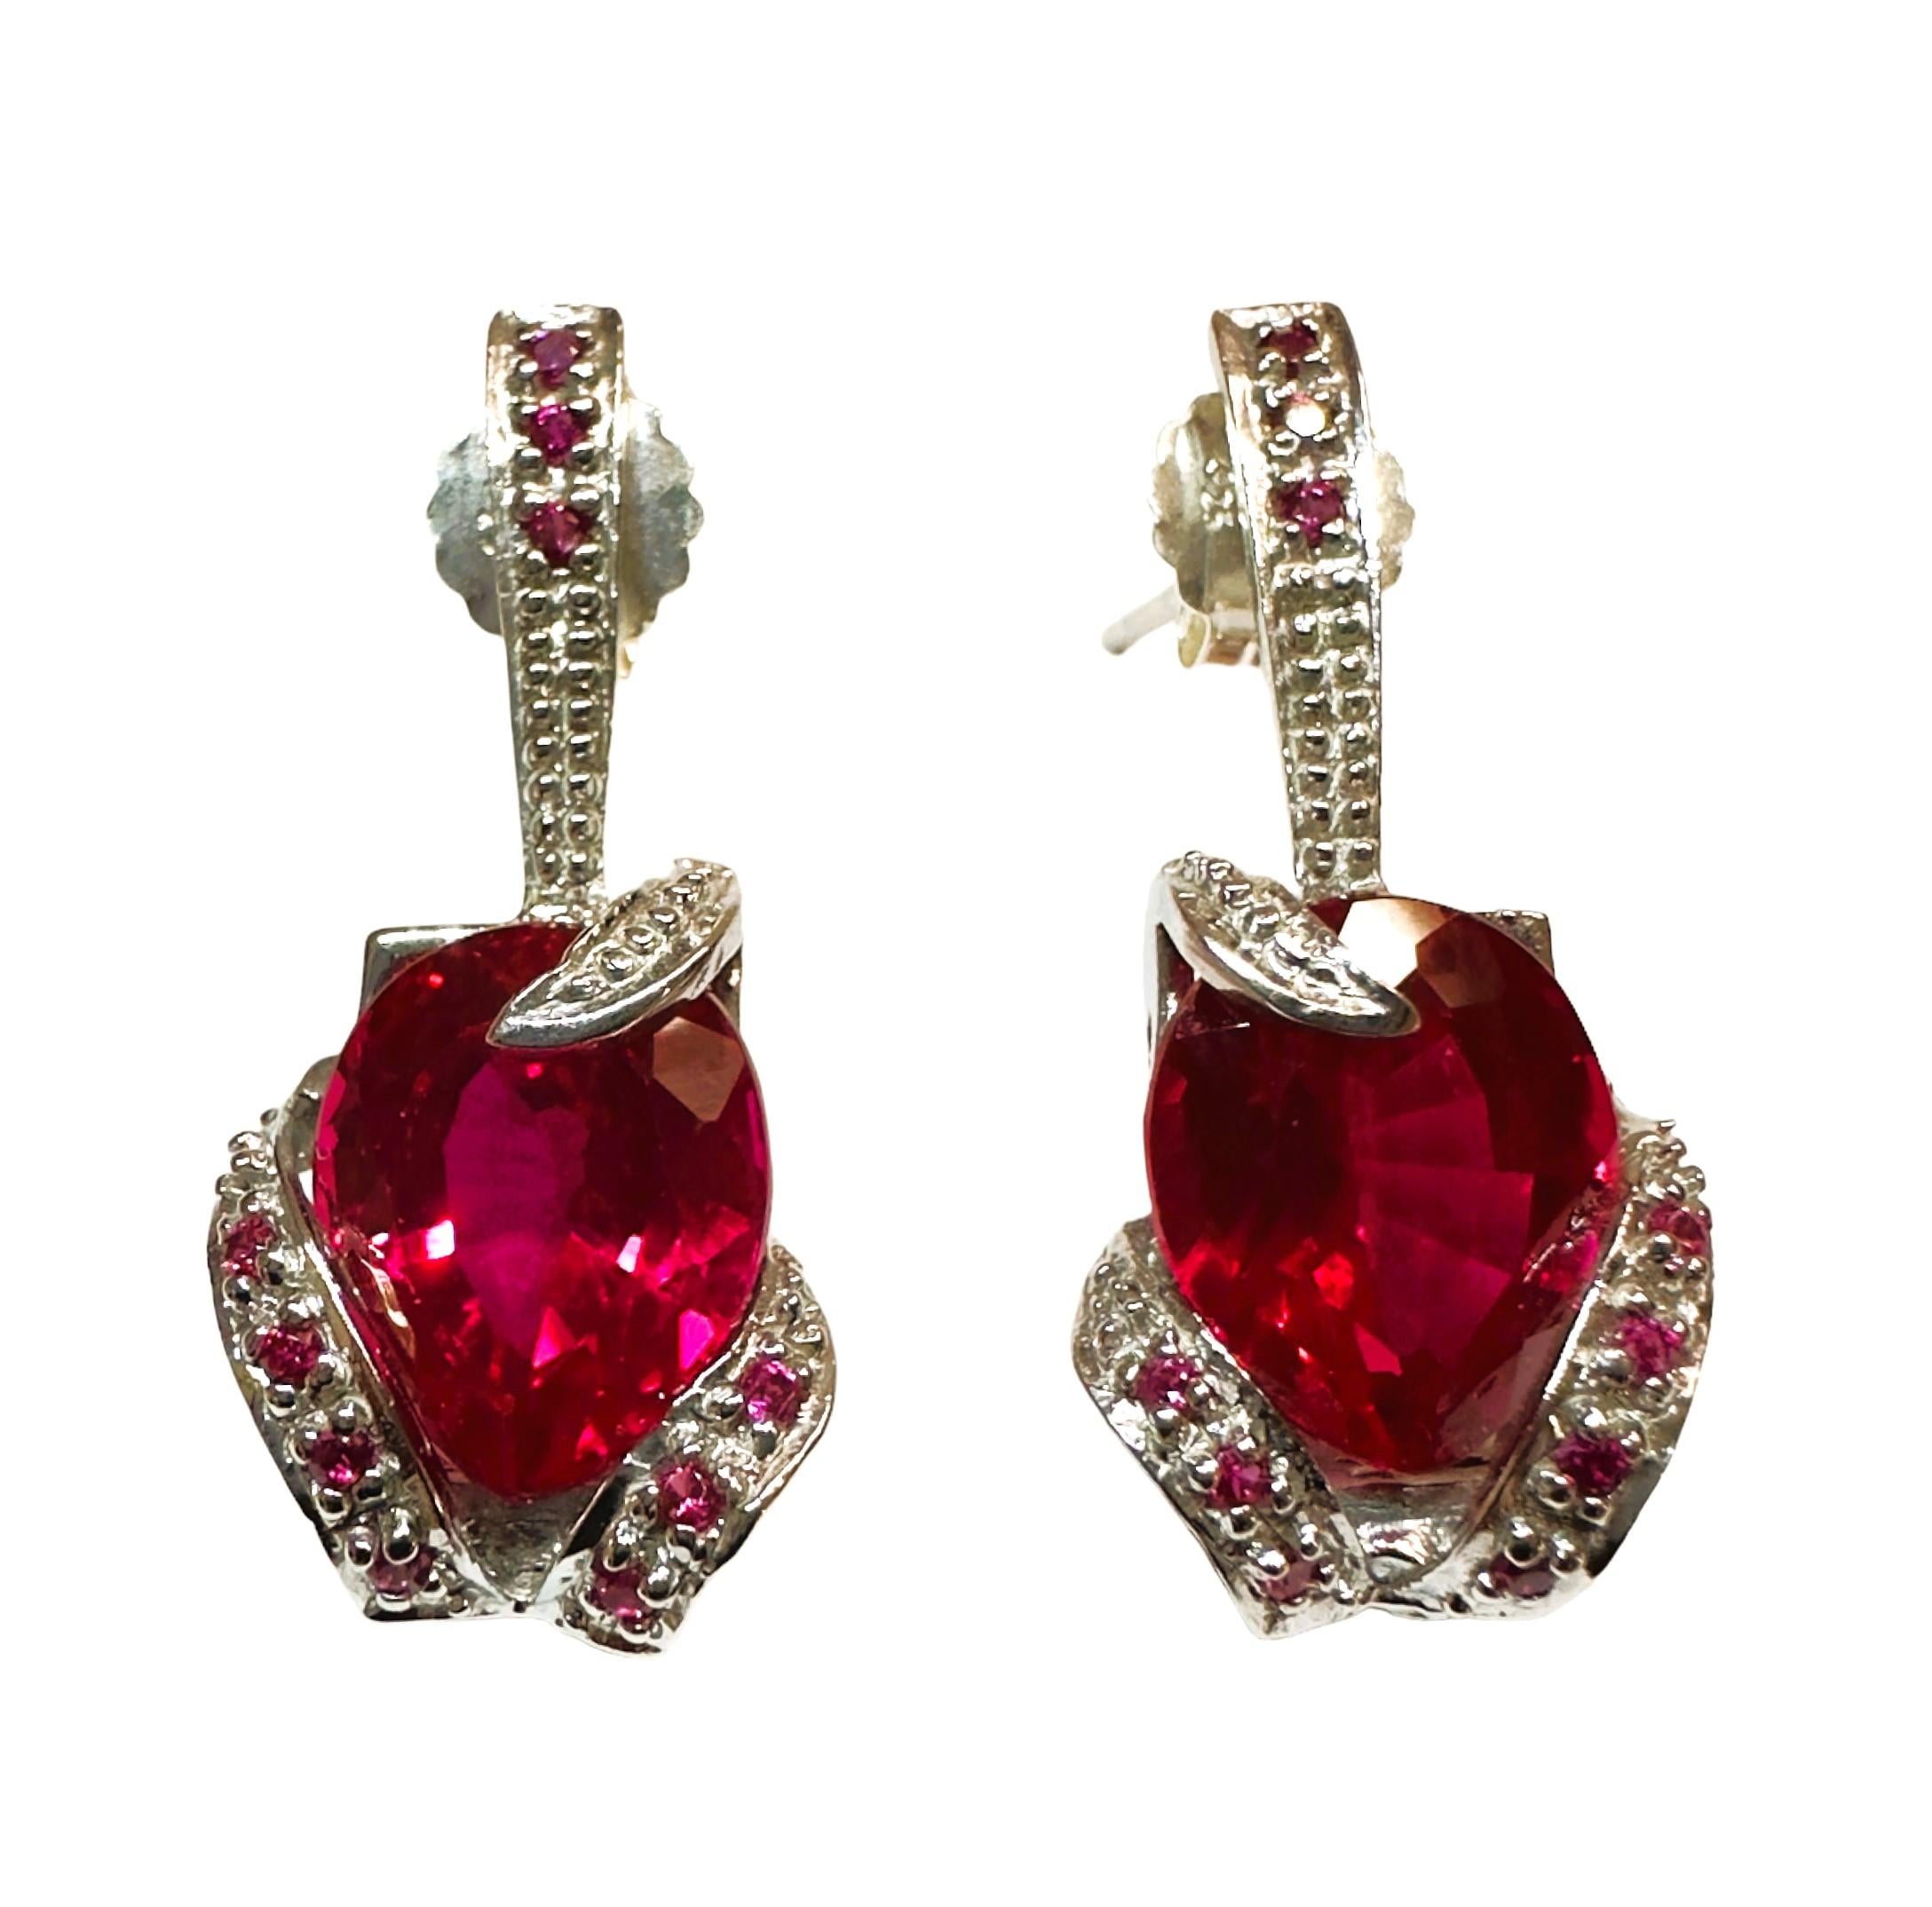 Women's New African 9.70 Ct Pinkish Red Sapphire Sterling Earrings For Sale